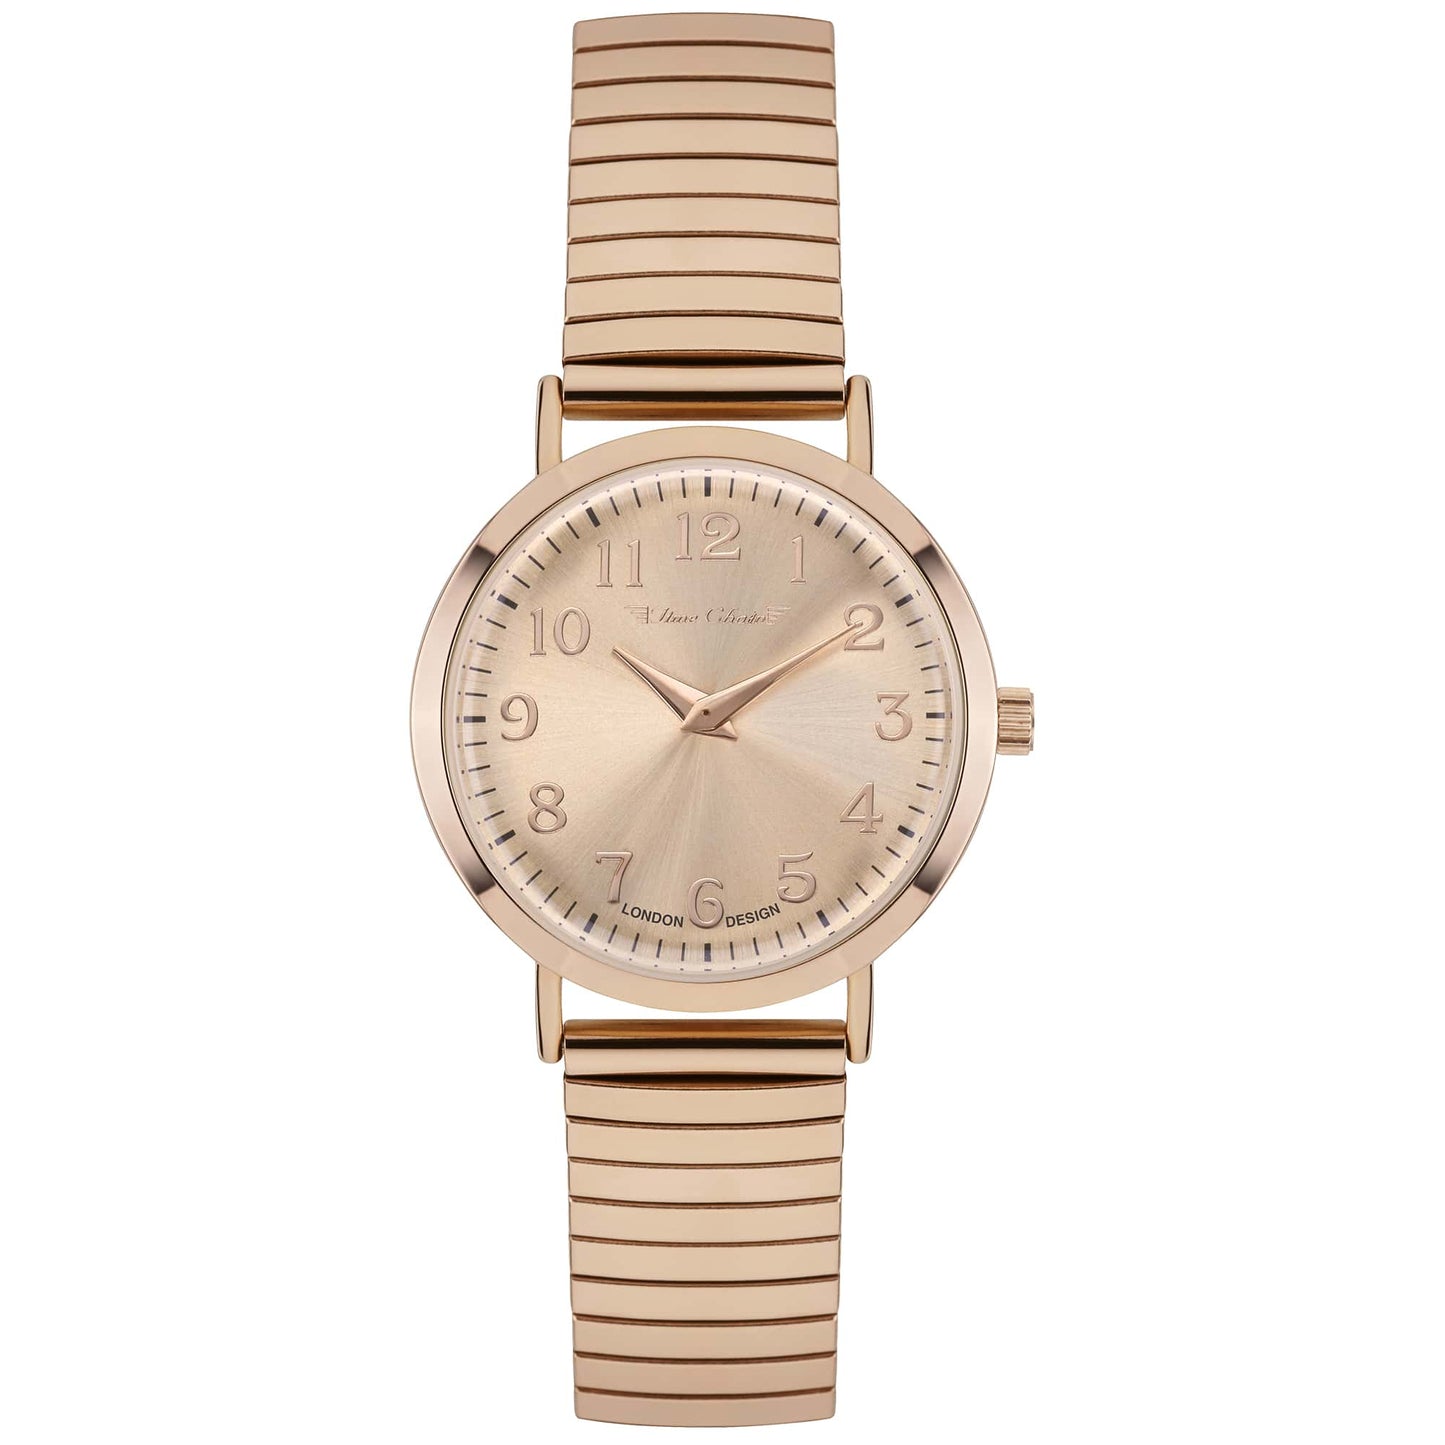 TIME CHAIN PUTNEY SPANDEX WATCH ROSE GOLD